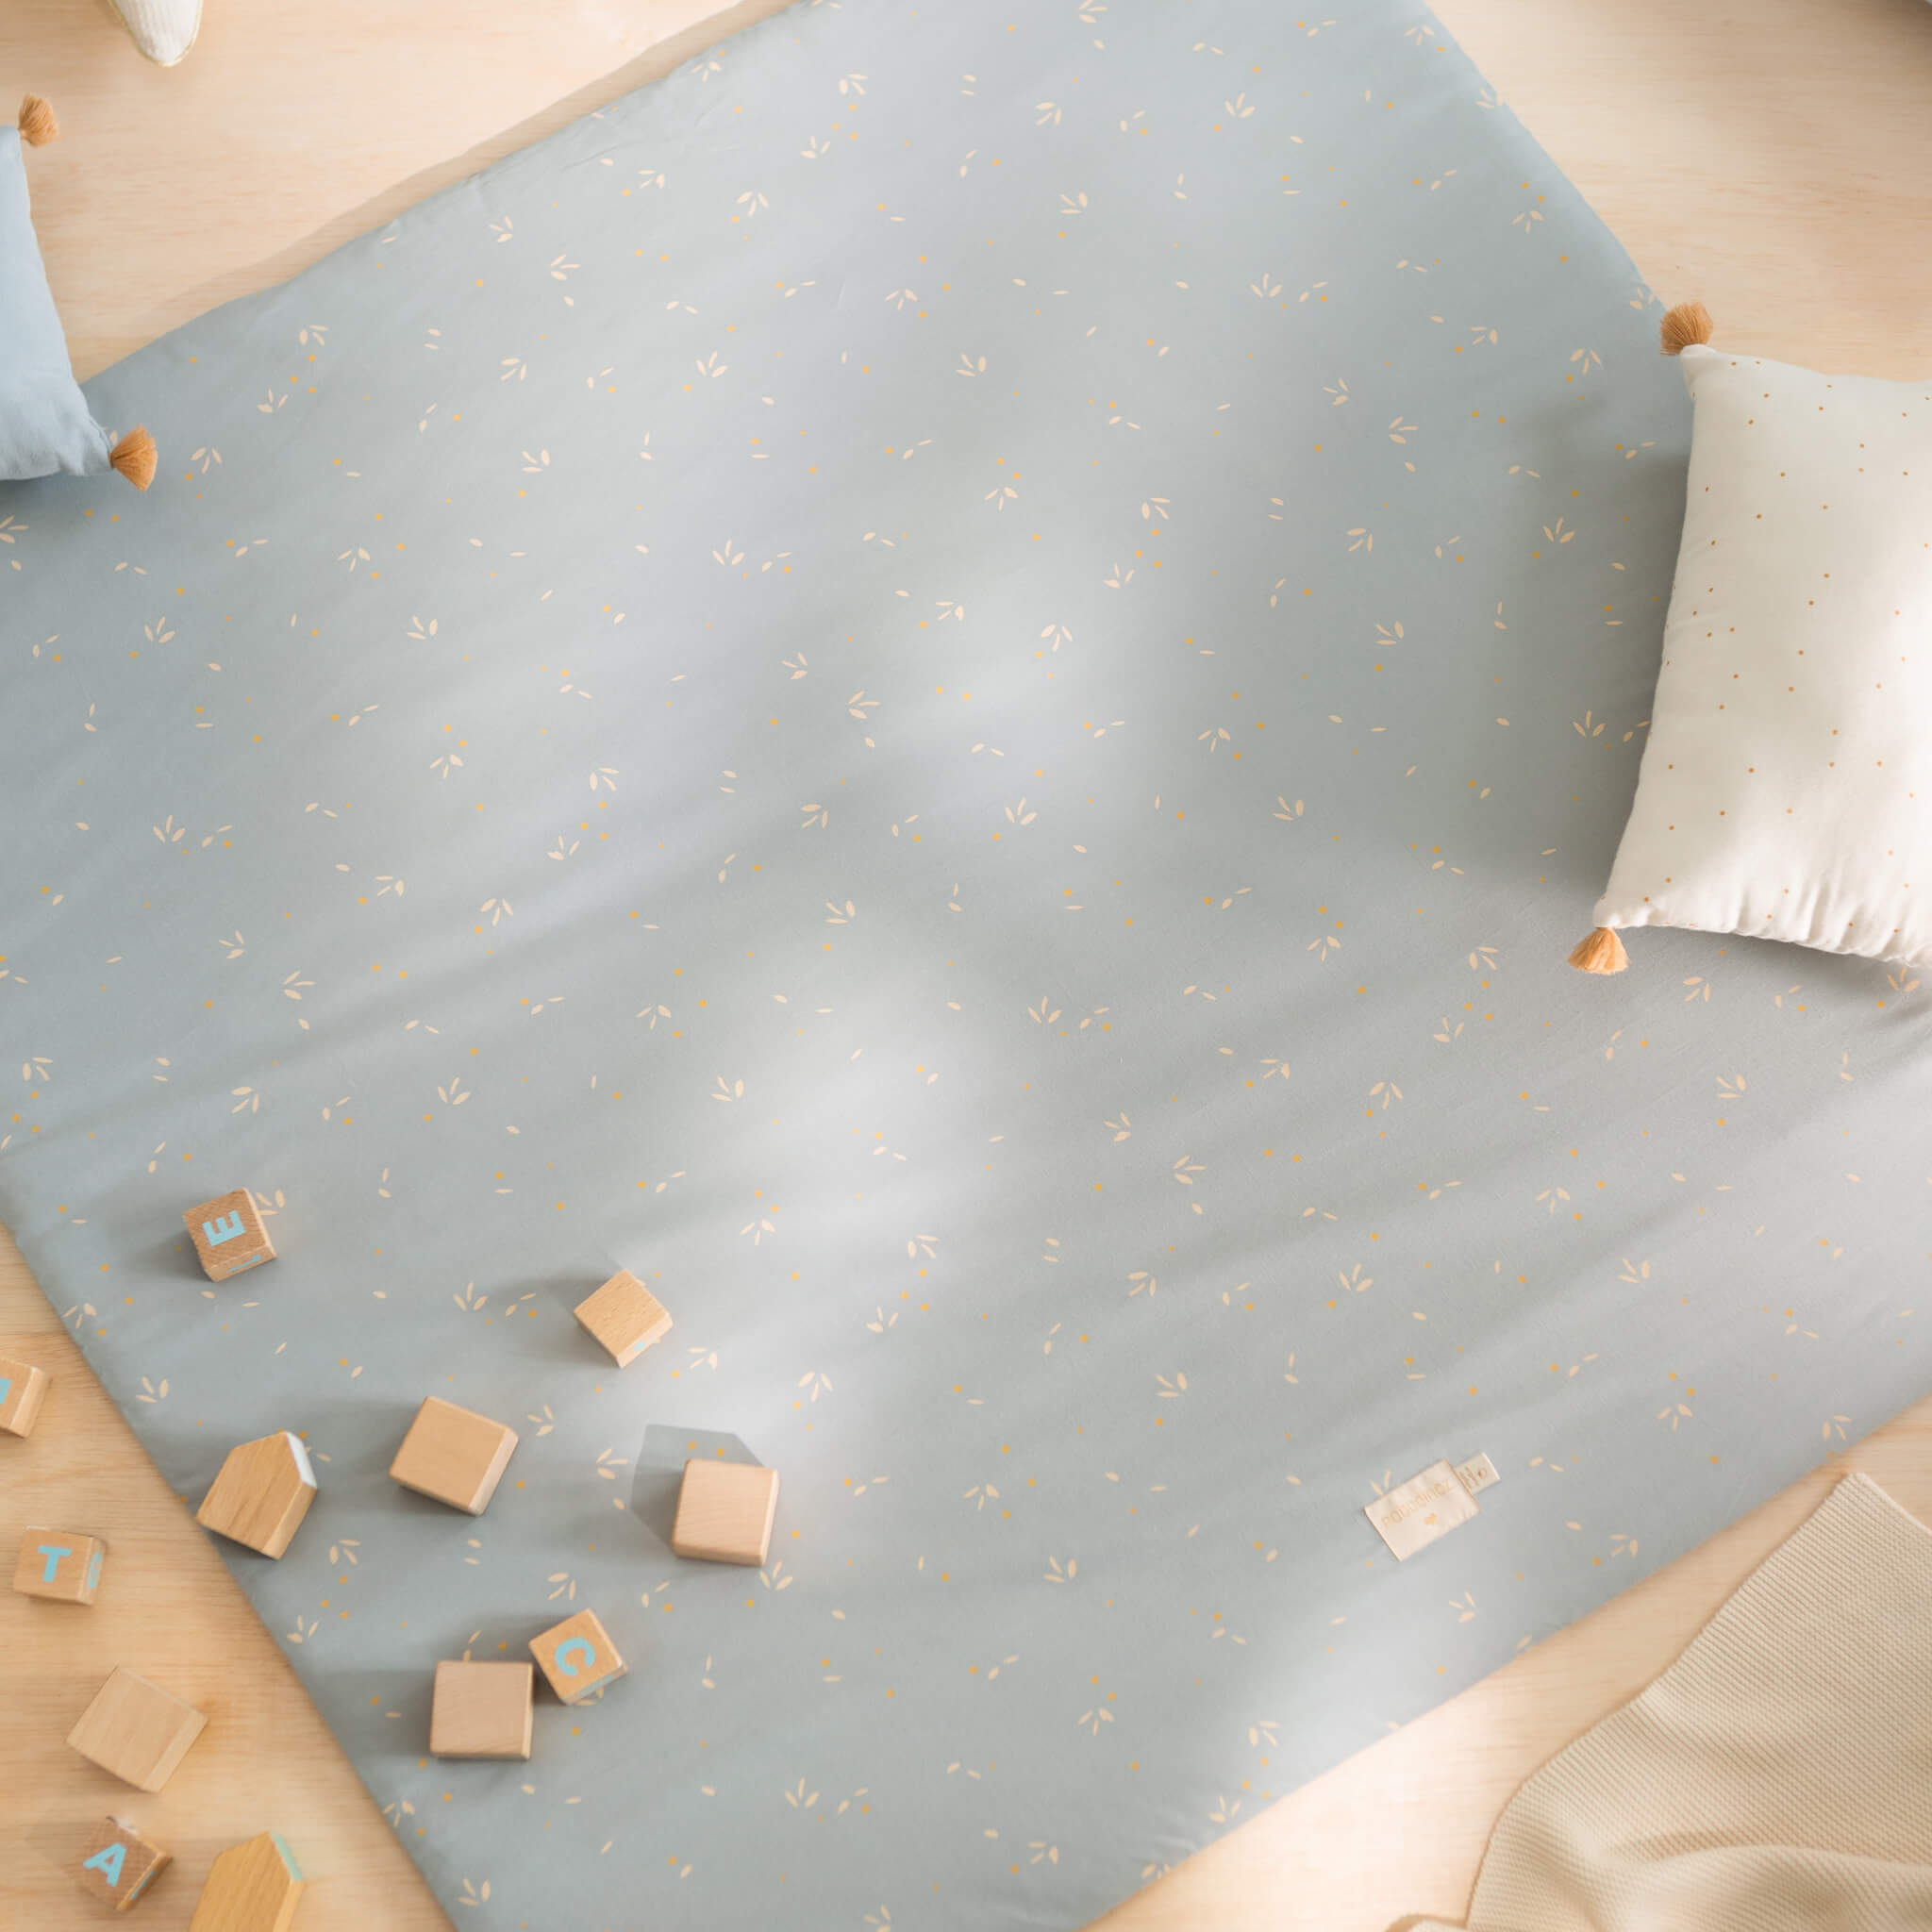 Nobodinoz Colorado Square Playmat in Willow Soft Blue with Toys & Cushions